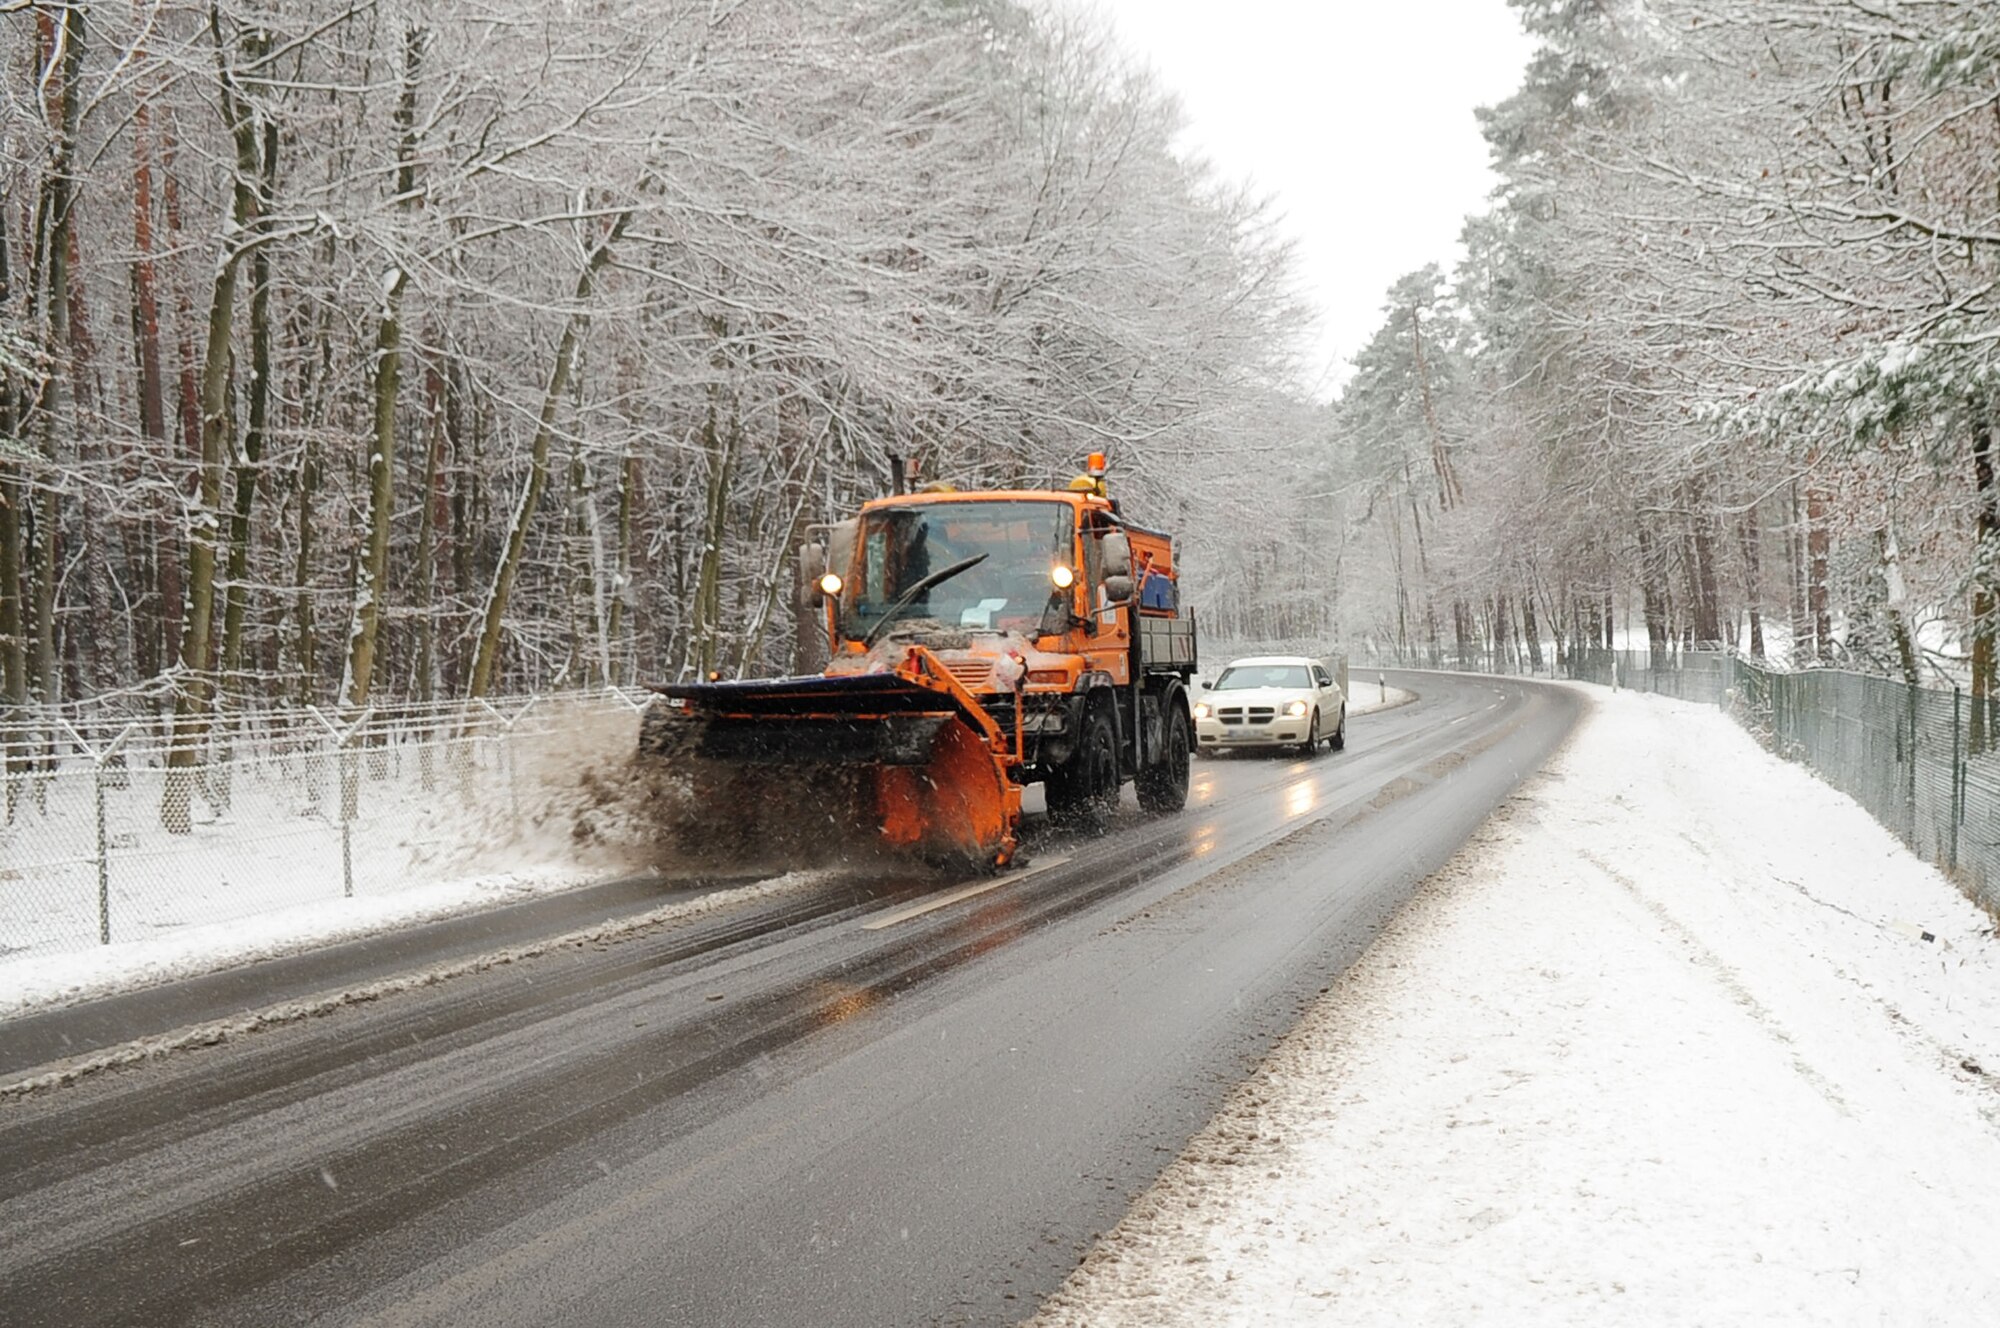 A snow plower plows the roads, Ramstein, Germany, Nov. 29, 2010. The purpose of snow plowing is to help maintain safe driving conditions on roads throughout the Kaiserslautern Military Community. (U.S. Air Force photo by Senior Airman Brittany Nicole Perry)